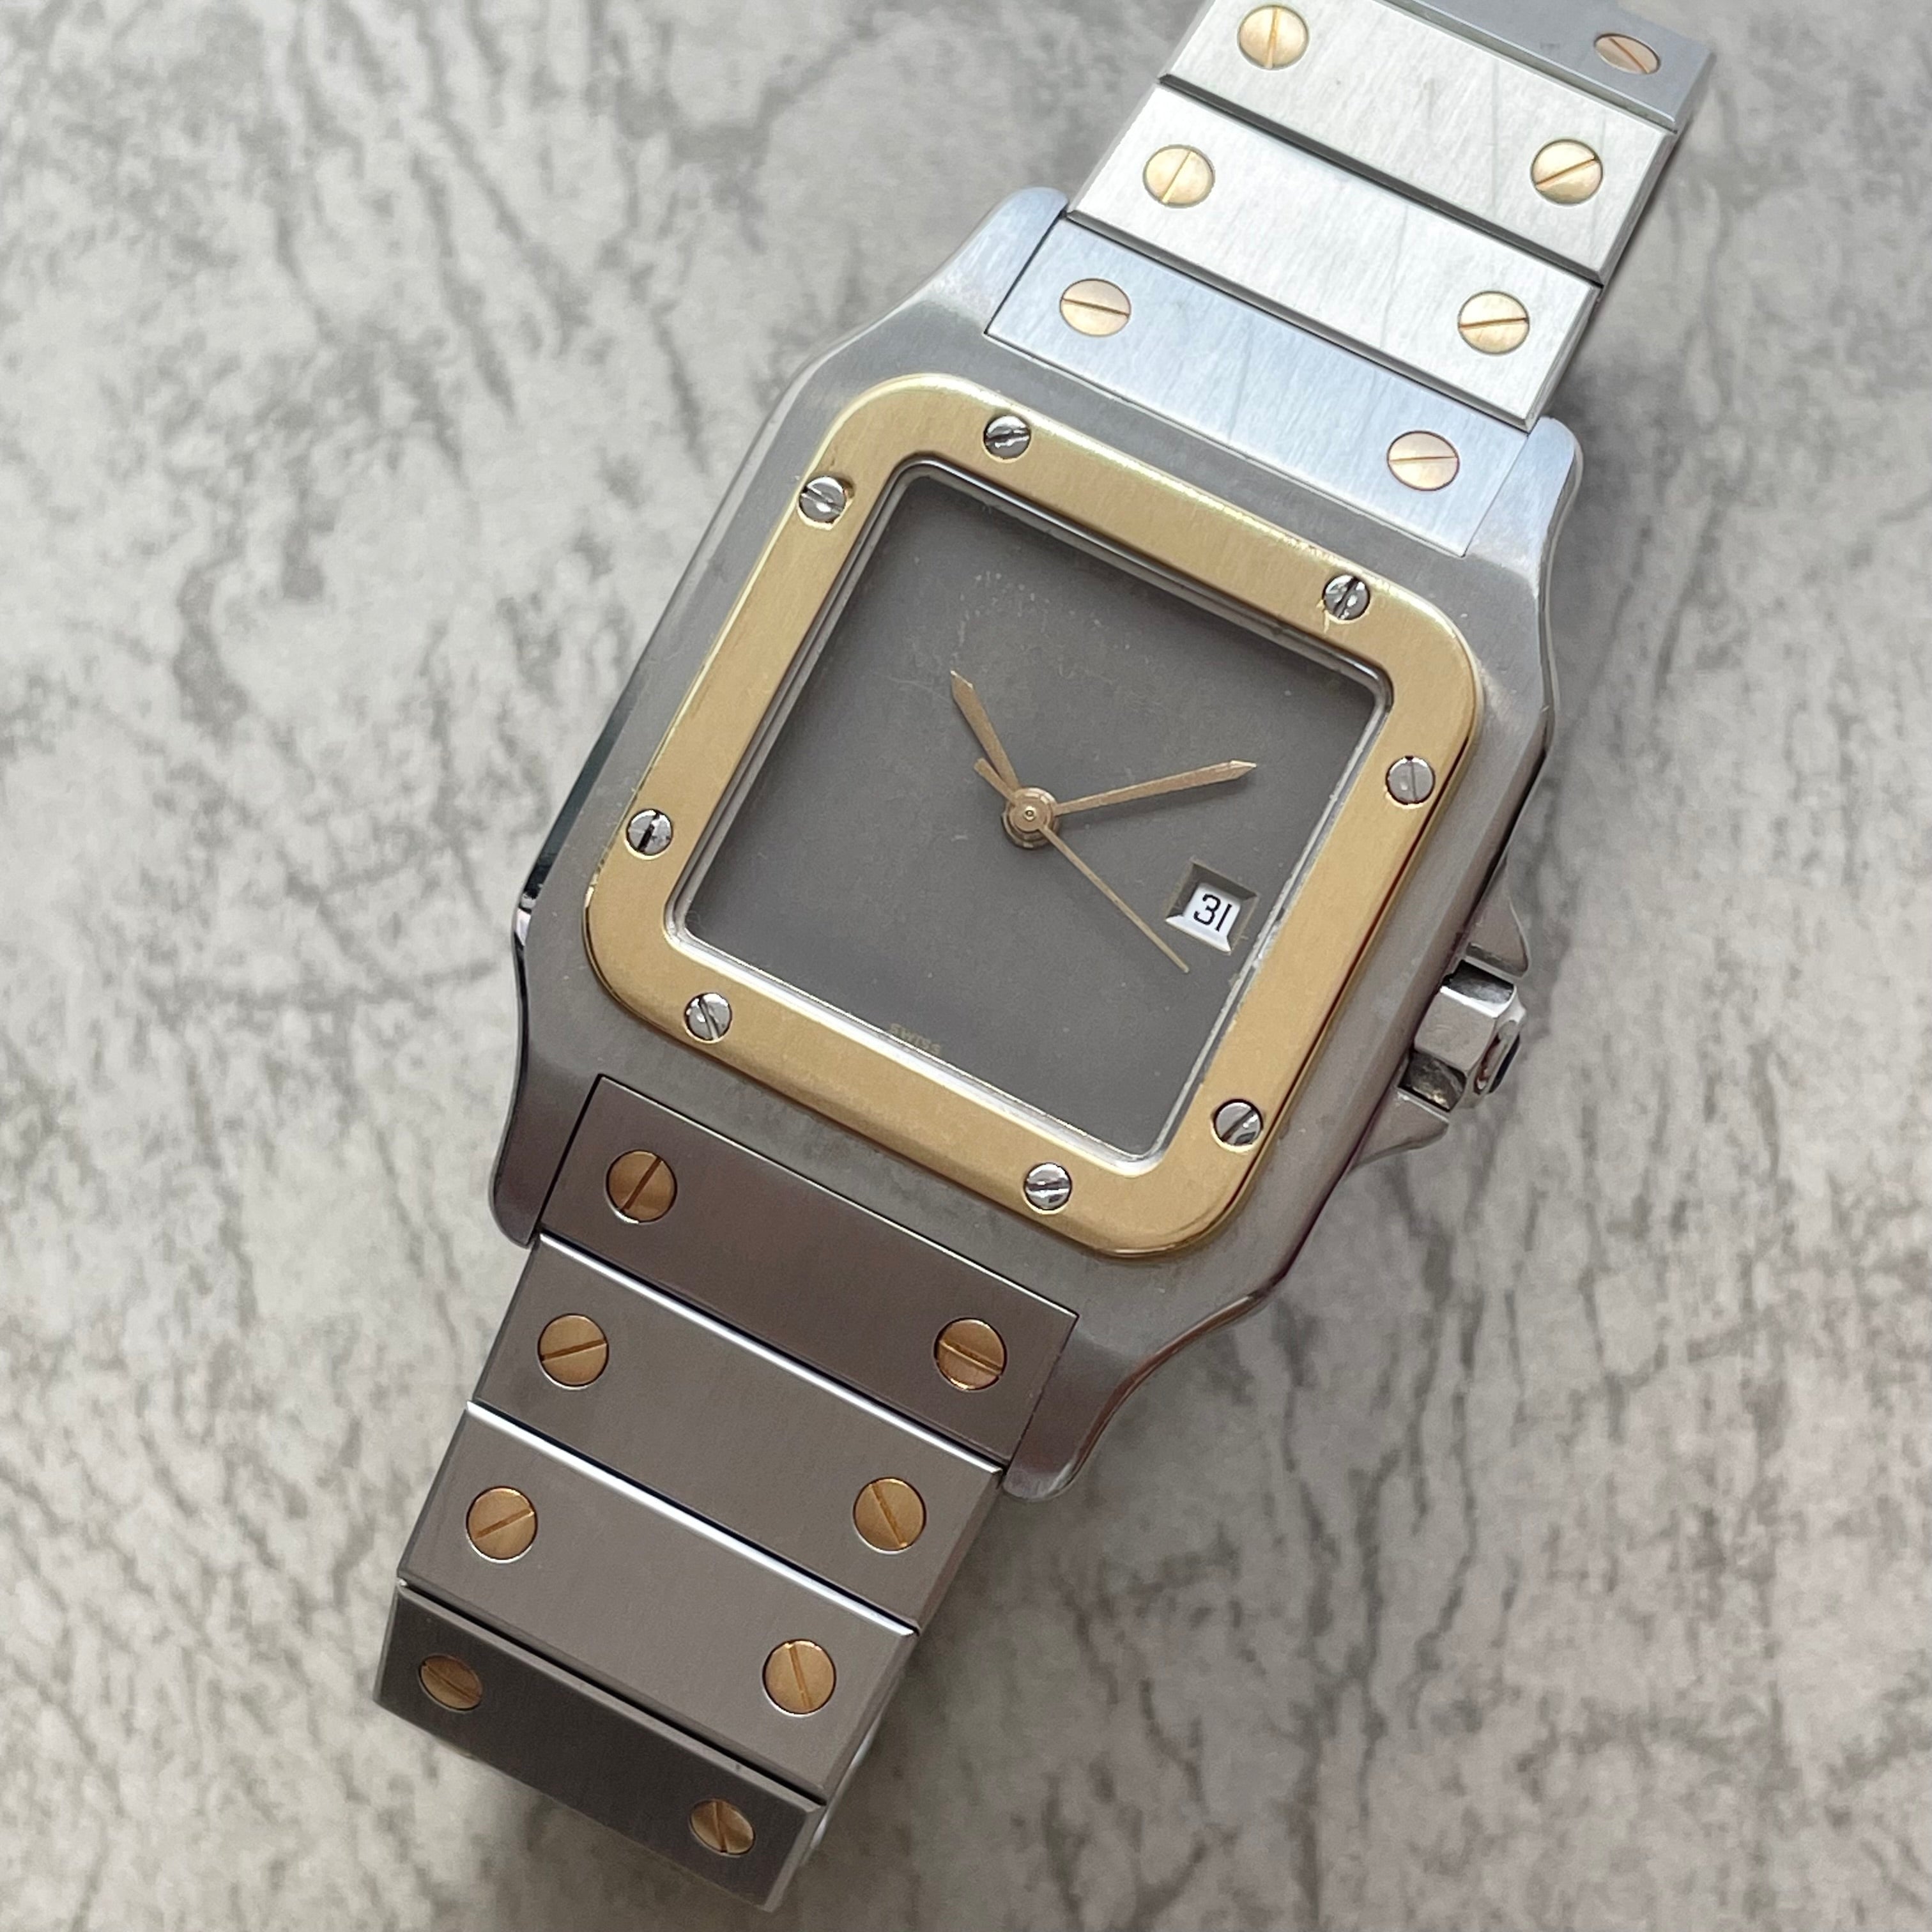 Cartier】サントスガルベLMコンビGrey 付属品付き – REGALO vintage watch